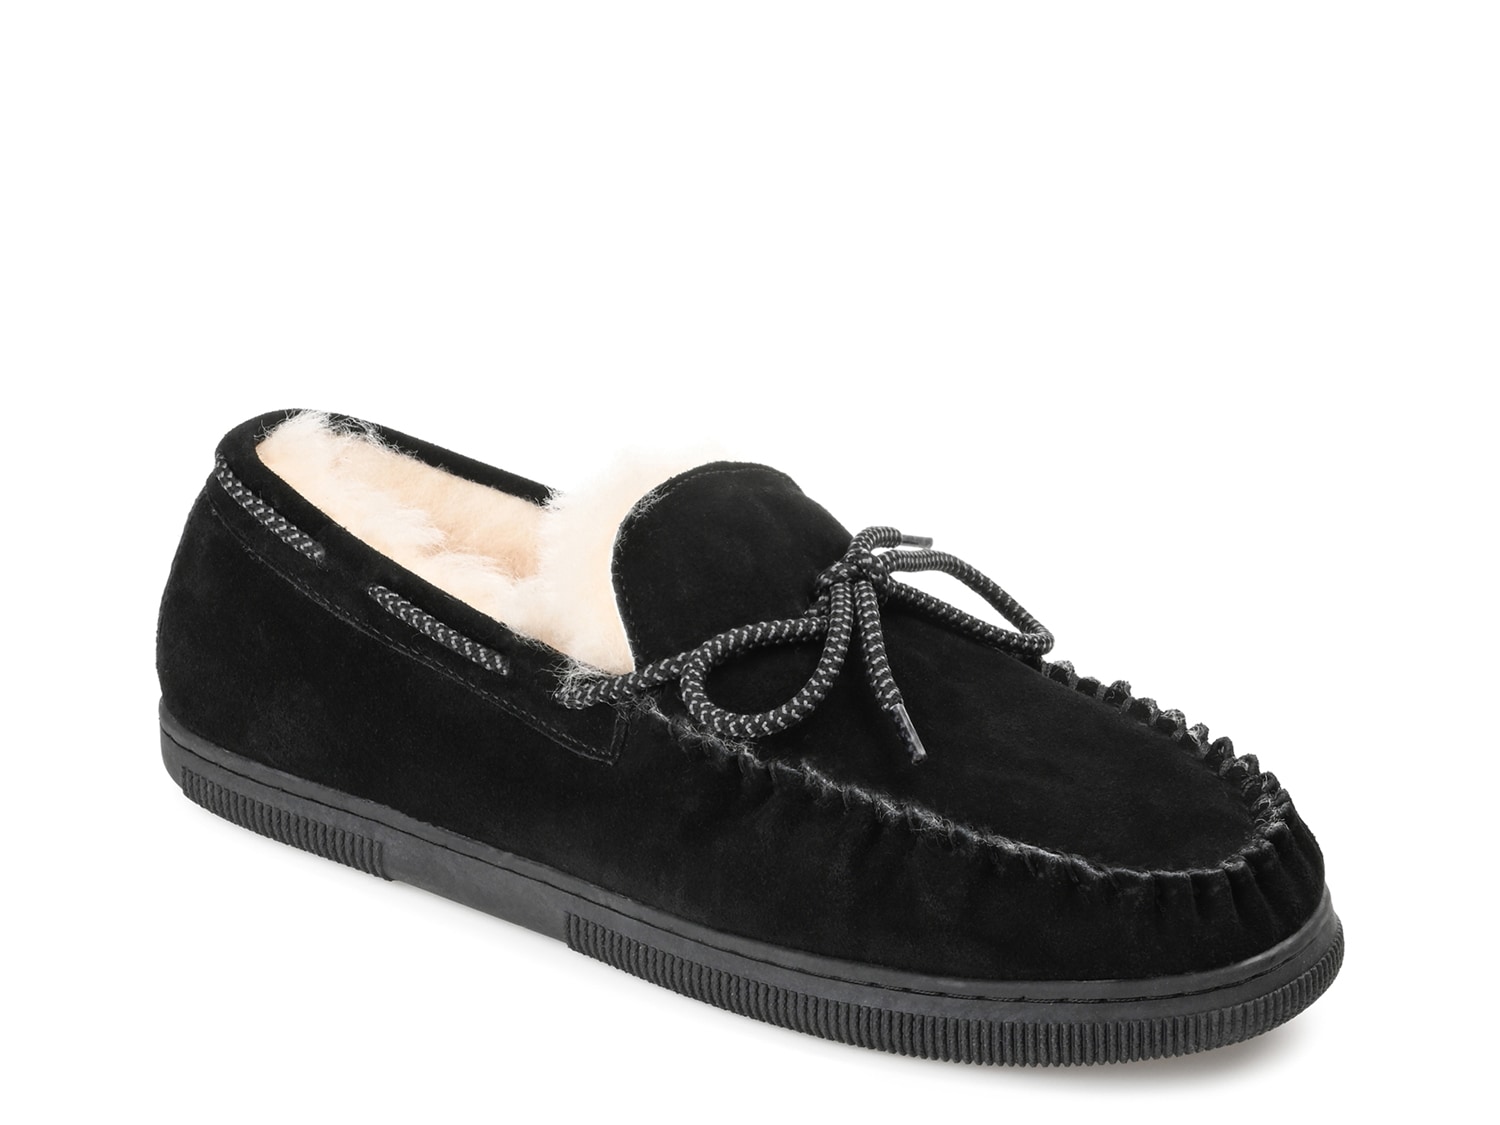 Territory Meander Slipper - Free Shipping | DSW